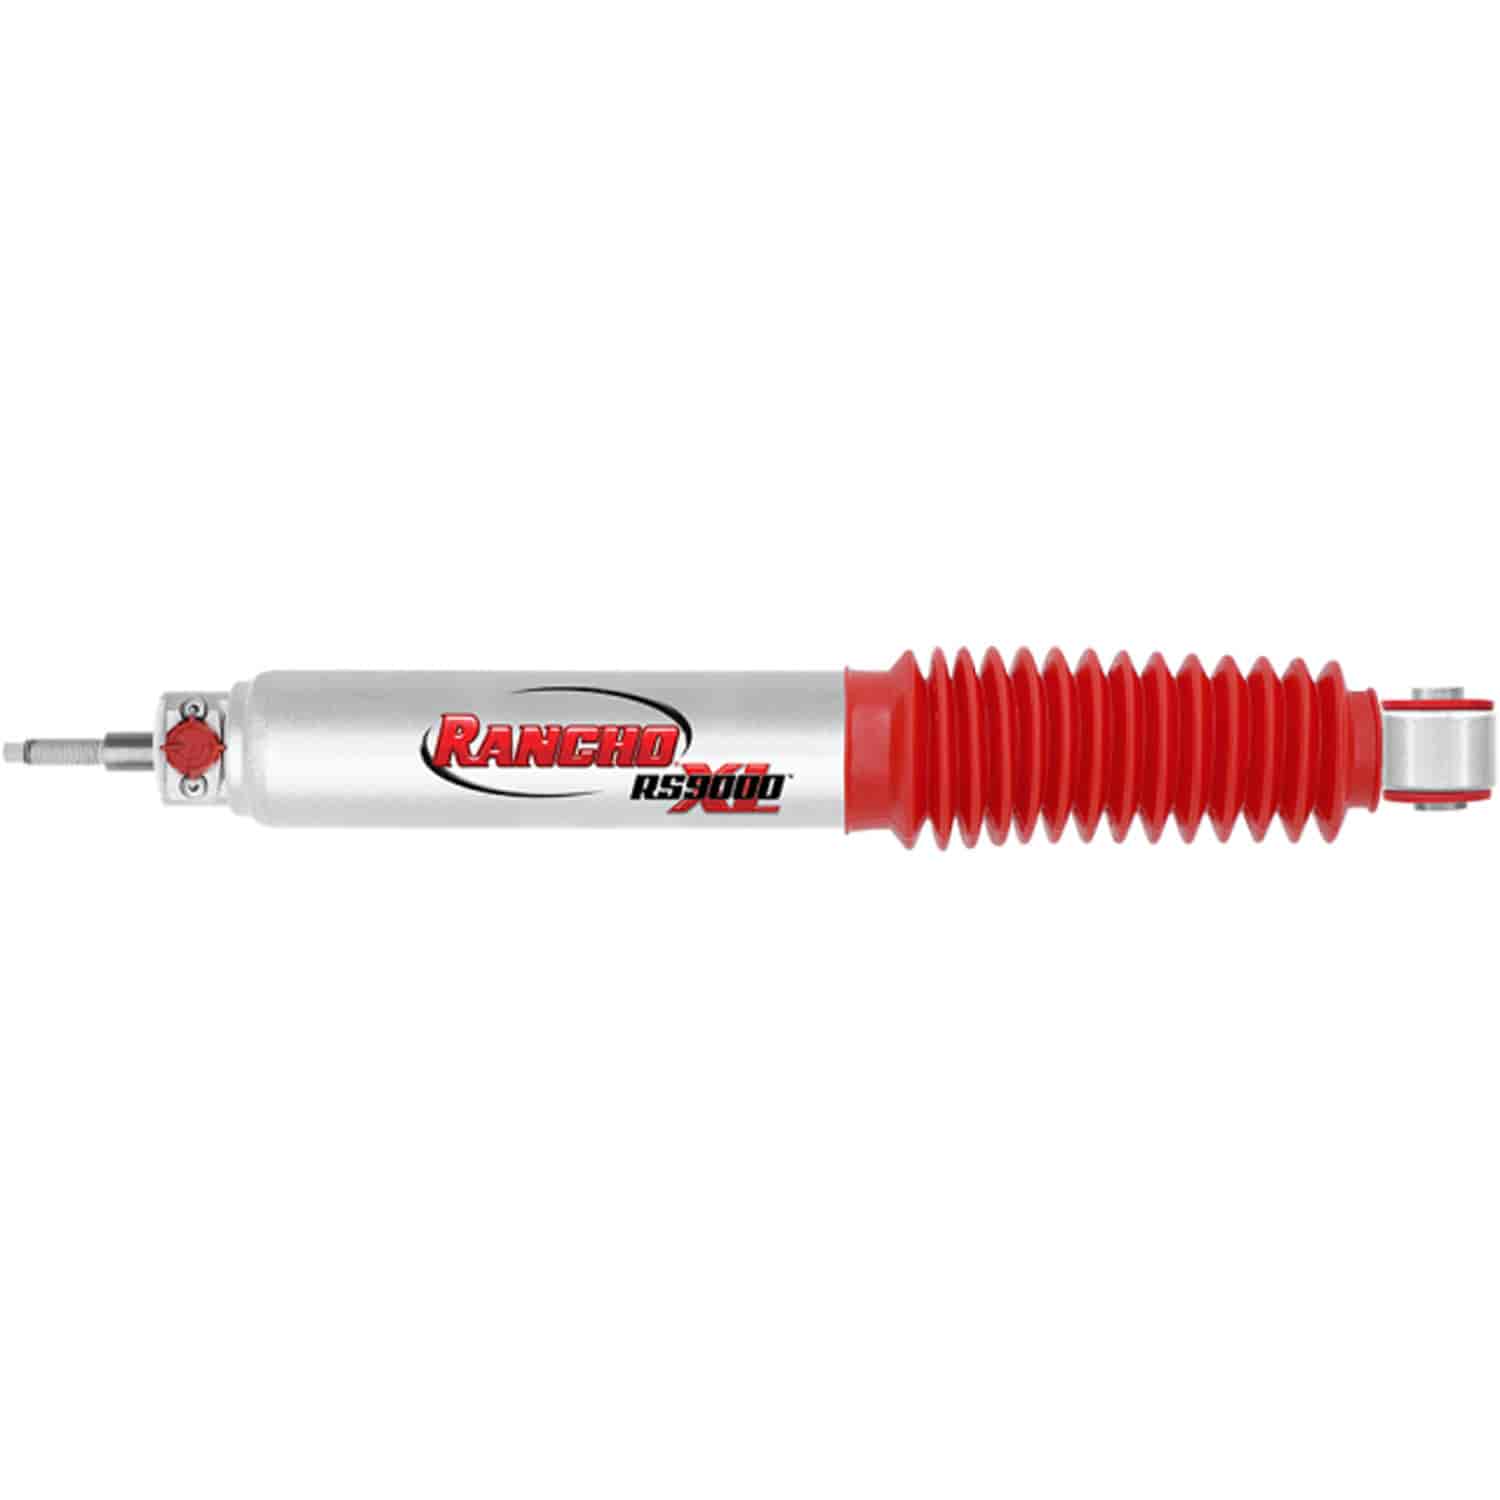 RS9000XL Rear Shock Absorber Fits Land Rover Range Rover